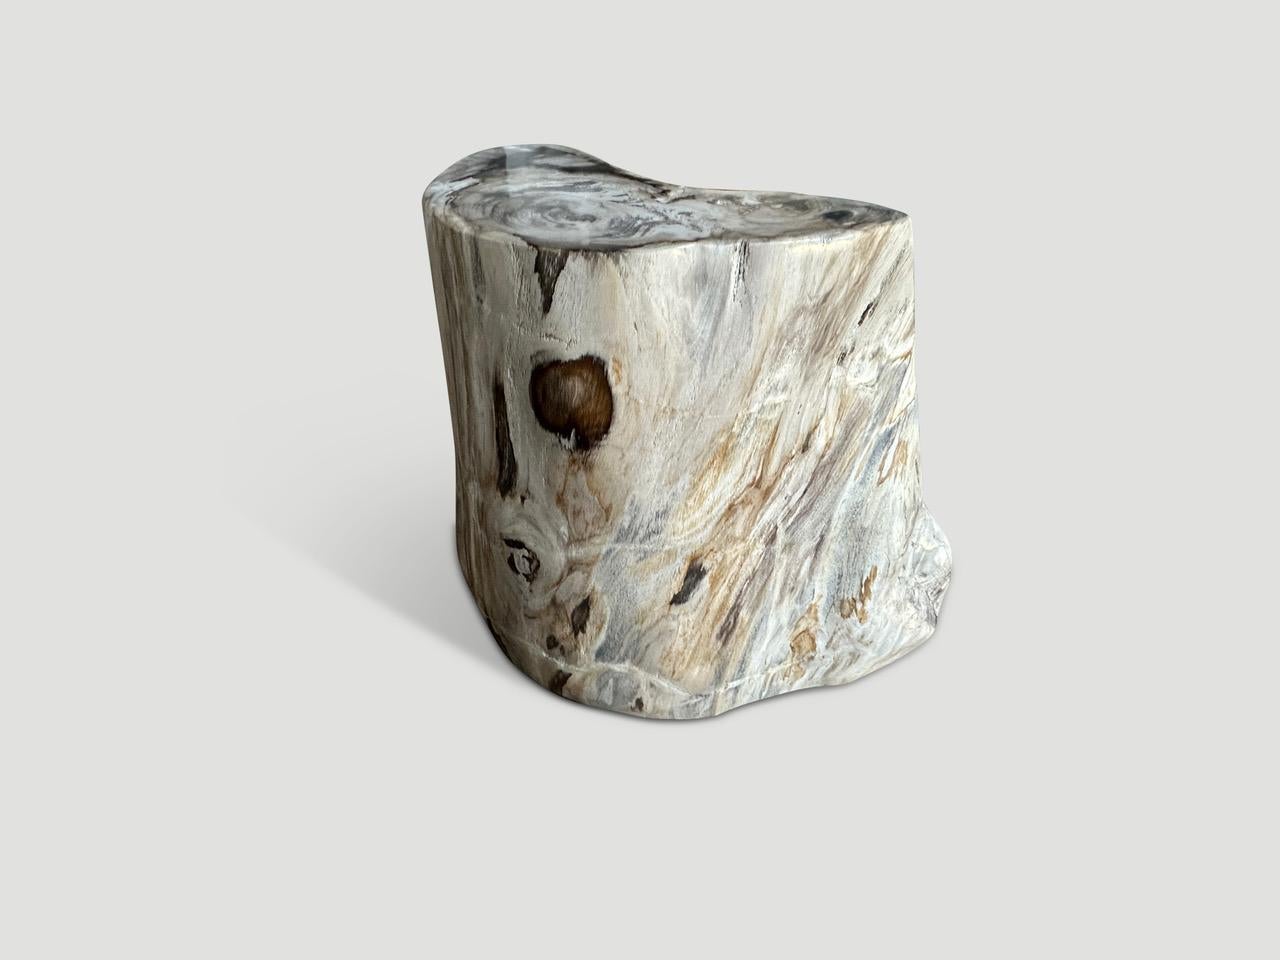 Beautiful pale grey tones on this impressive high quality petrified wood side table. It’s fascinating how Mother Nature produces these stunning 40 million year old petrified teak logs with such contrasting colors and natural patterns throughout.